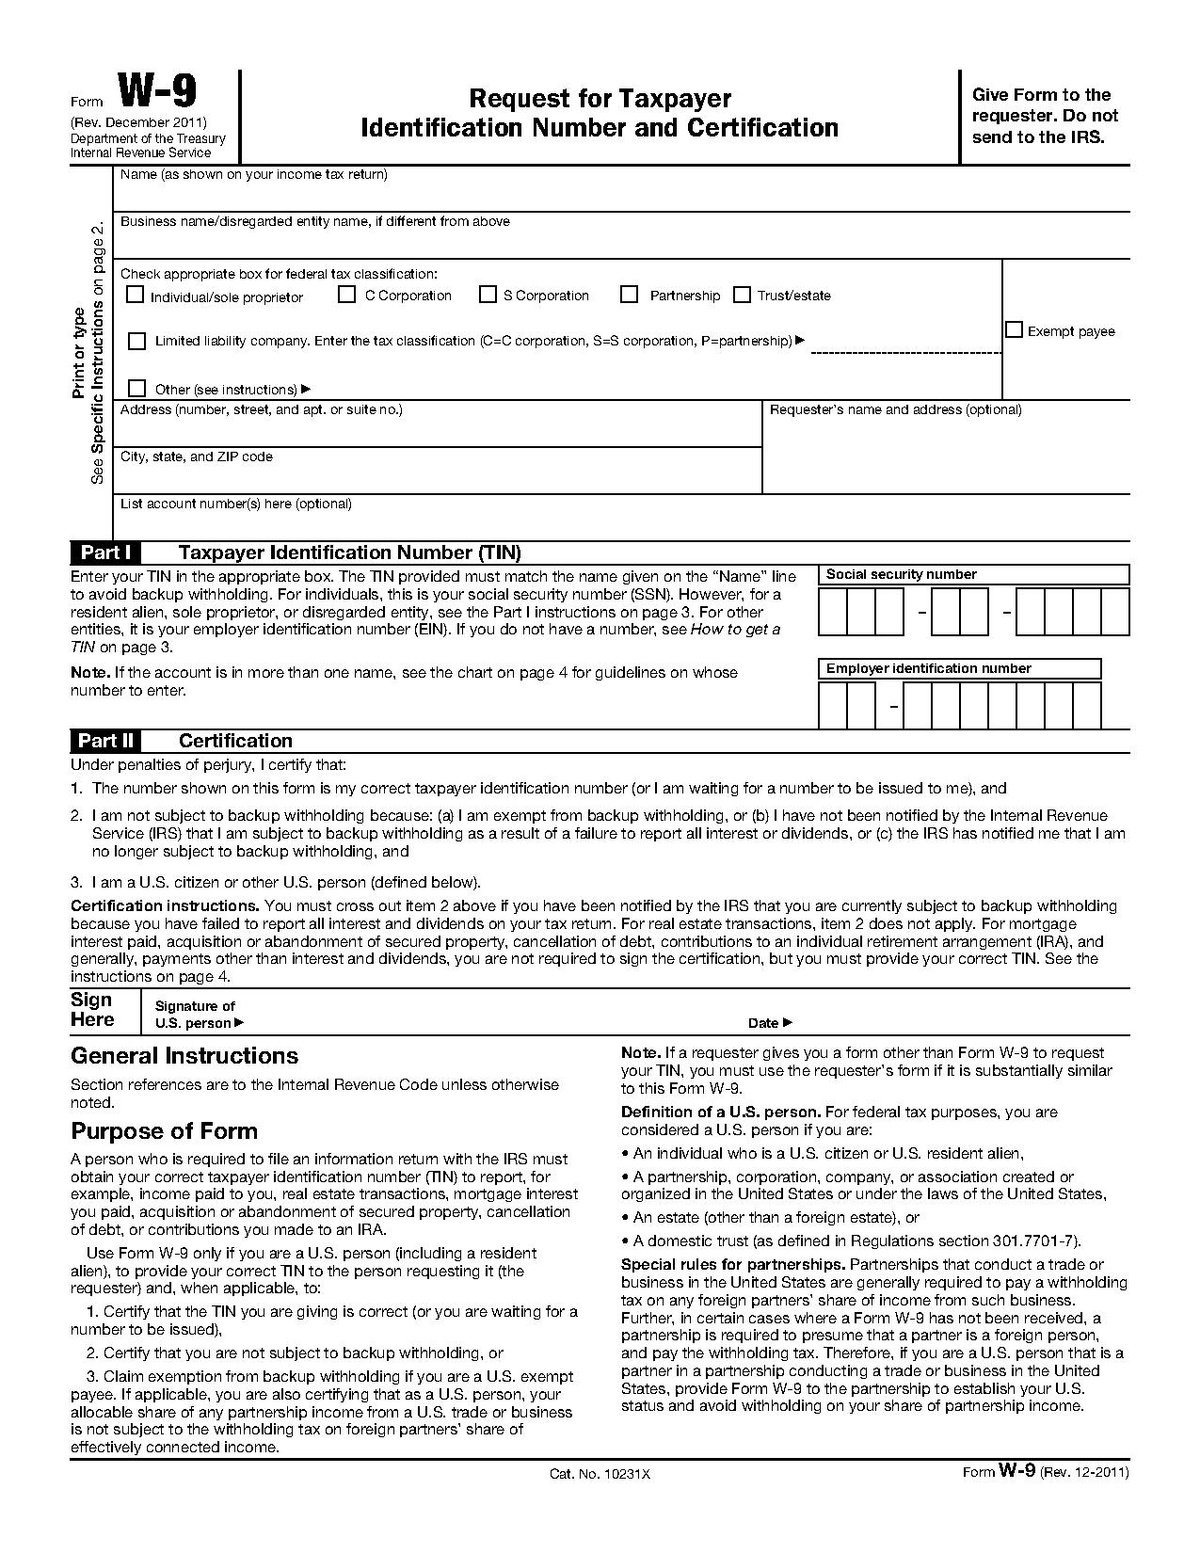 Where To Find Printable Form W9